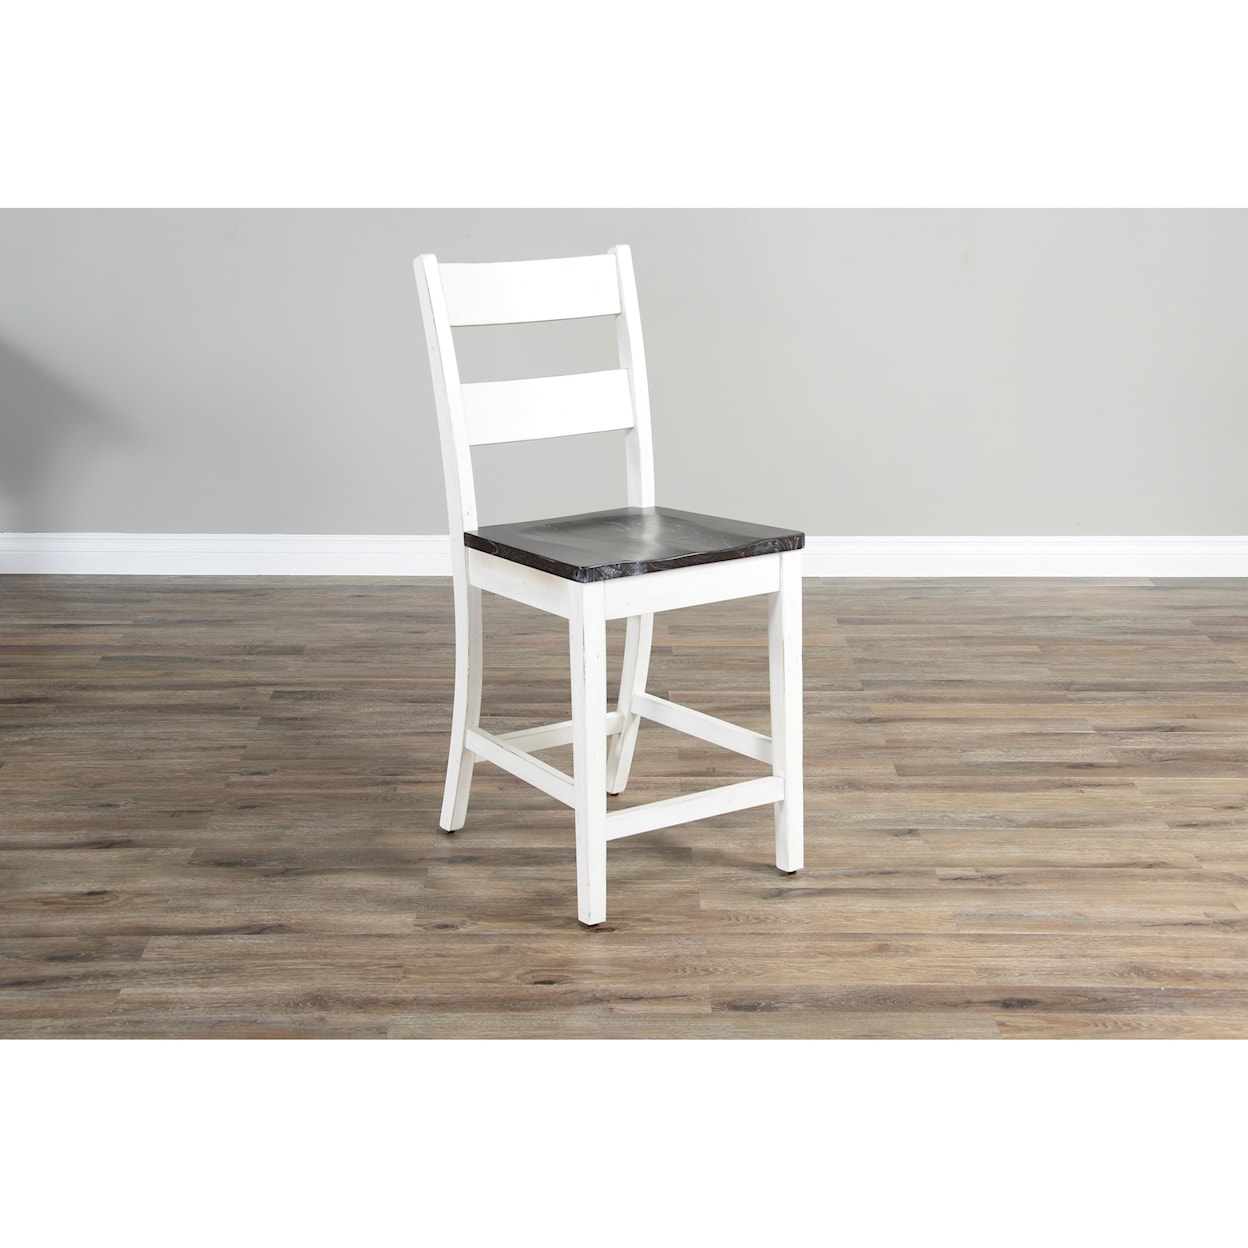 Sunny Designs Carriage House 24" Ladderback Barstool